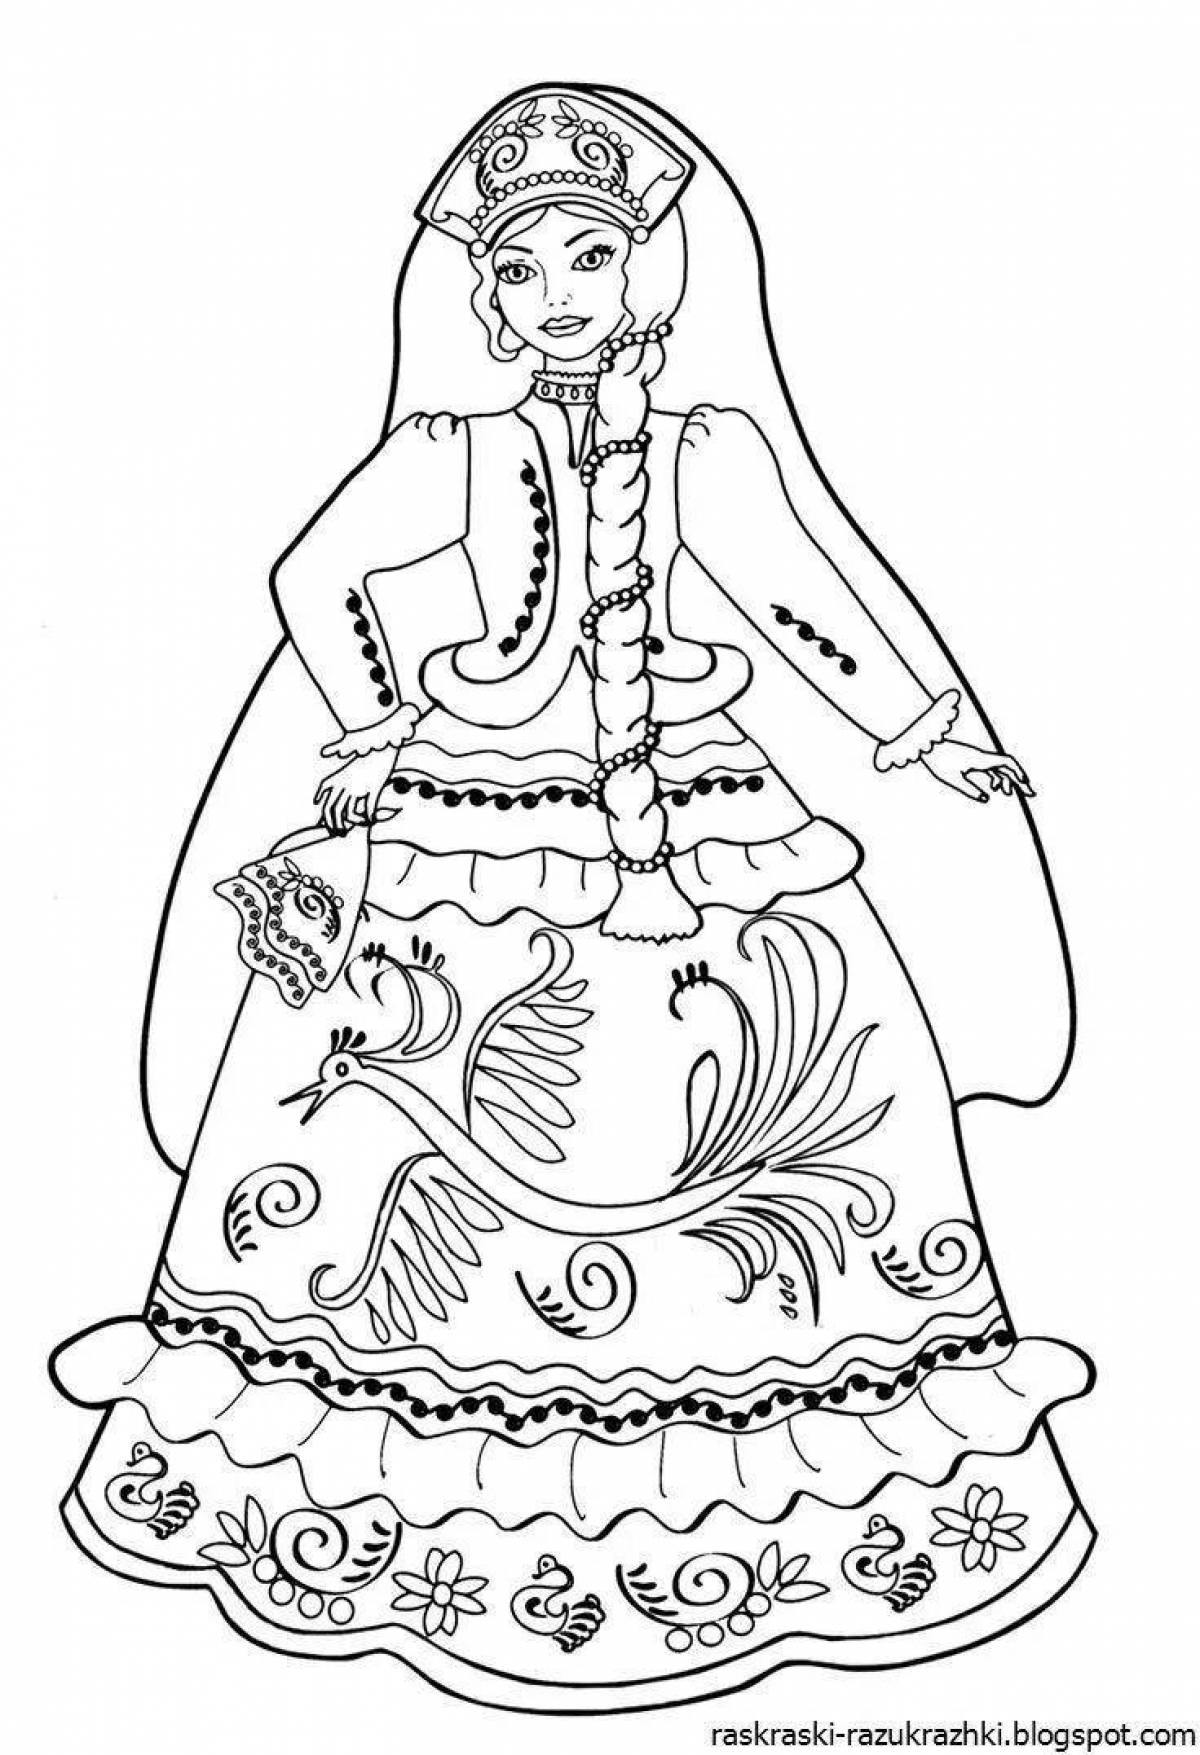 Playful Russian costume coloring page for toddlers